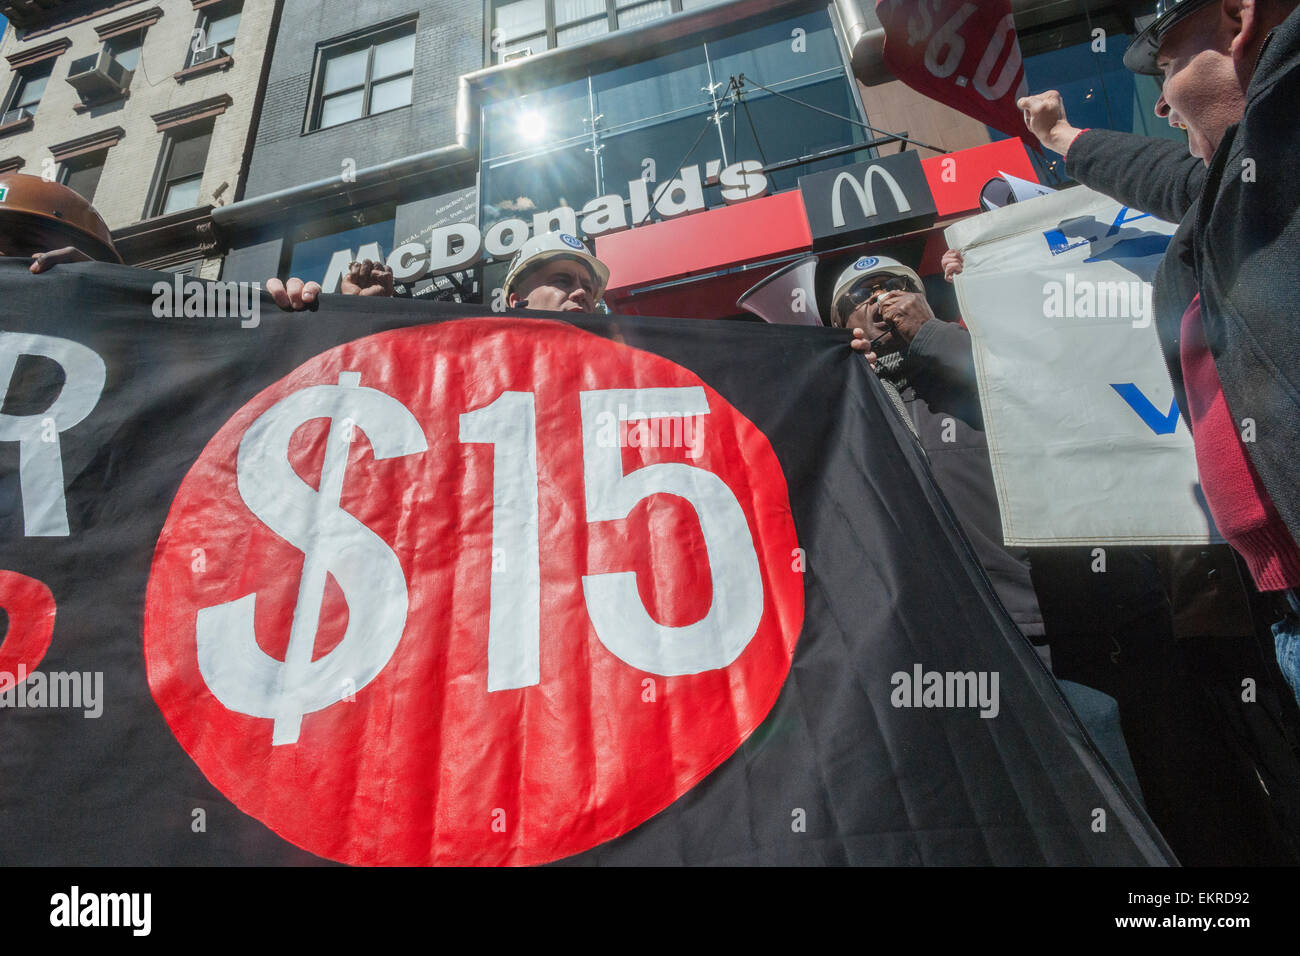 Construction workers join fast food workers at a protest in front of a McDonald's restaurant in New York on Saturday, April 4, 2015. The workers are advocating that fast food restaurants adopt a $15 per hour living wage for their employees. This is part of a series of events leading up to the National Day of Action on April 15 where workers in 200 cities will protest for wages, unions and better jobs. (© Richard B. Levine) Stock Photo